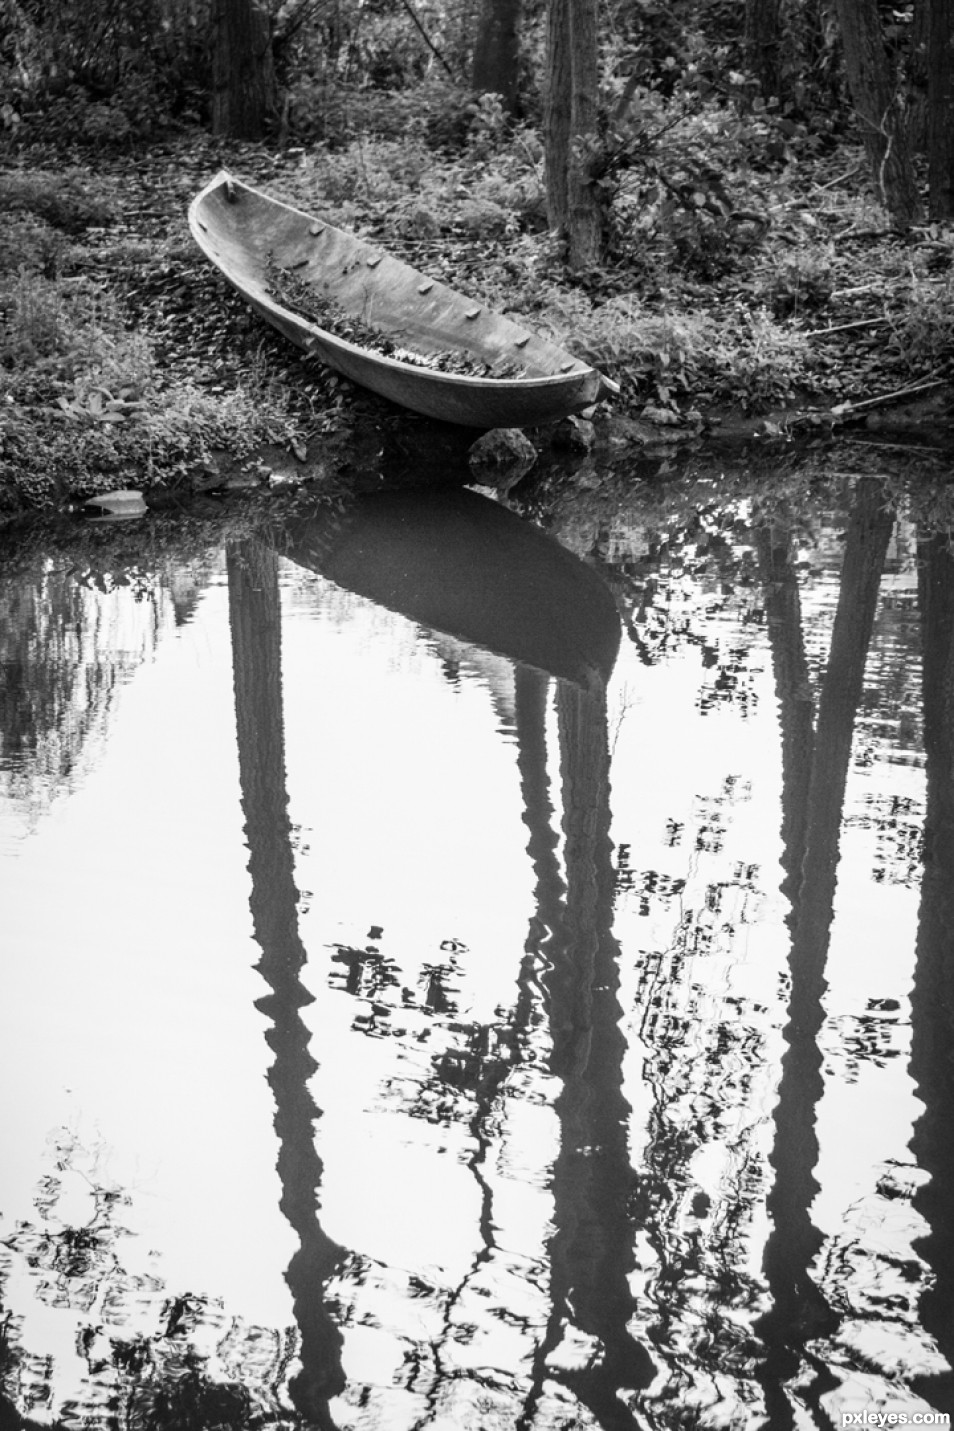 The pirogue